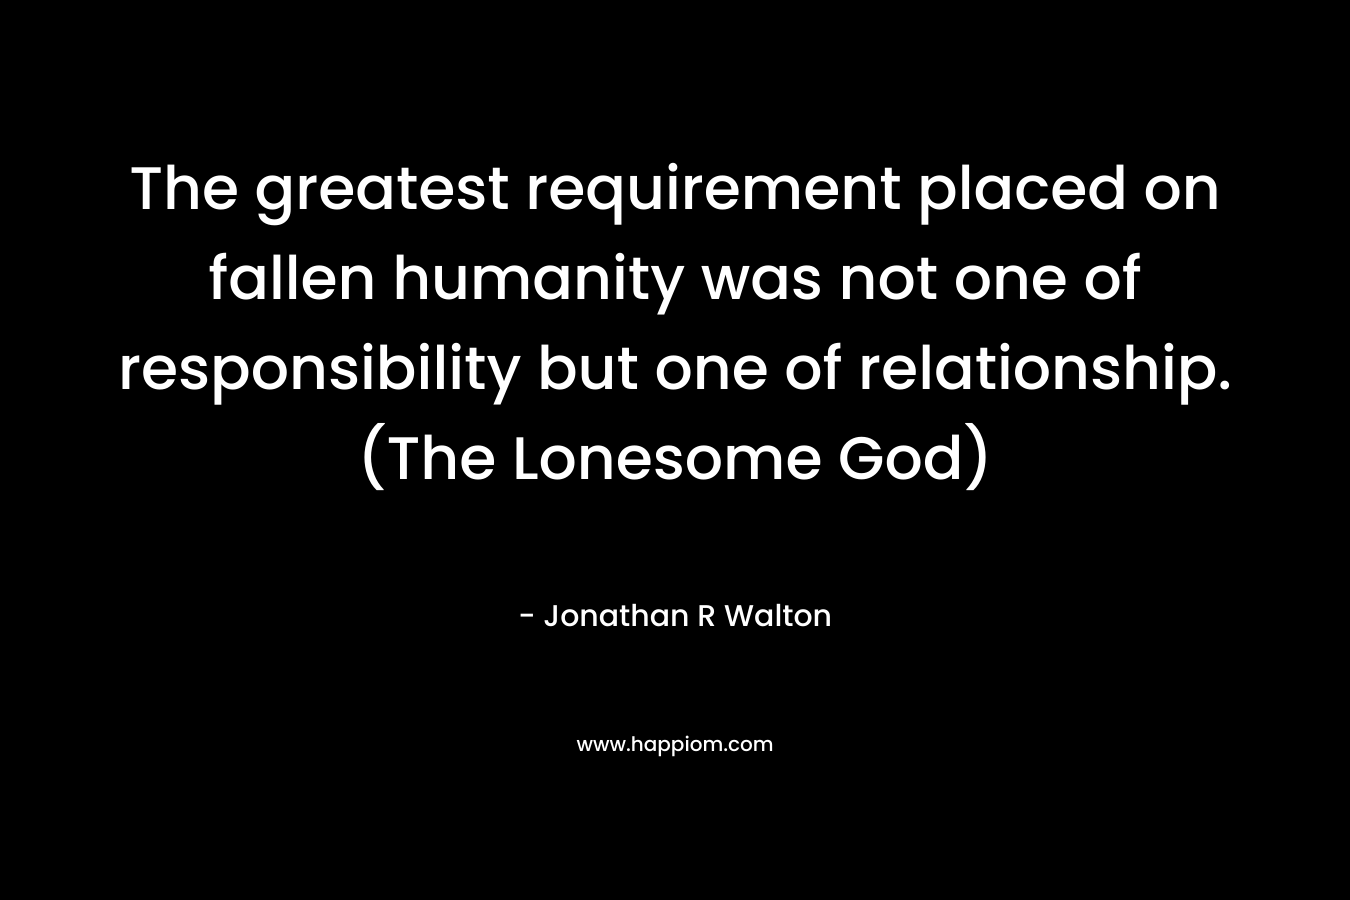 The greatest requirement placed on fallen humanity was not one of responsibility but one of relationship. (The Lonesome God) – Jonathan R Walton